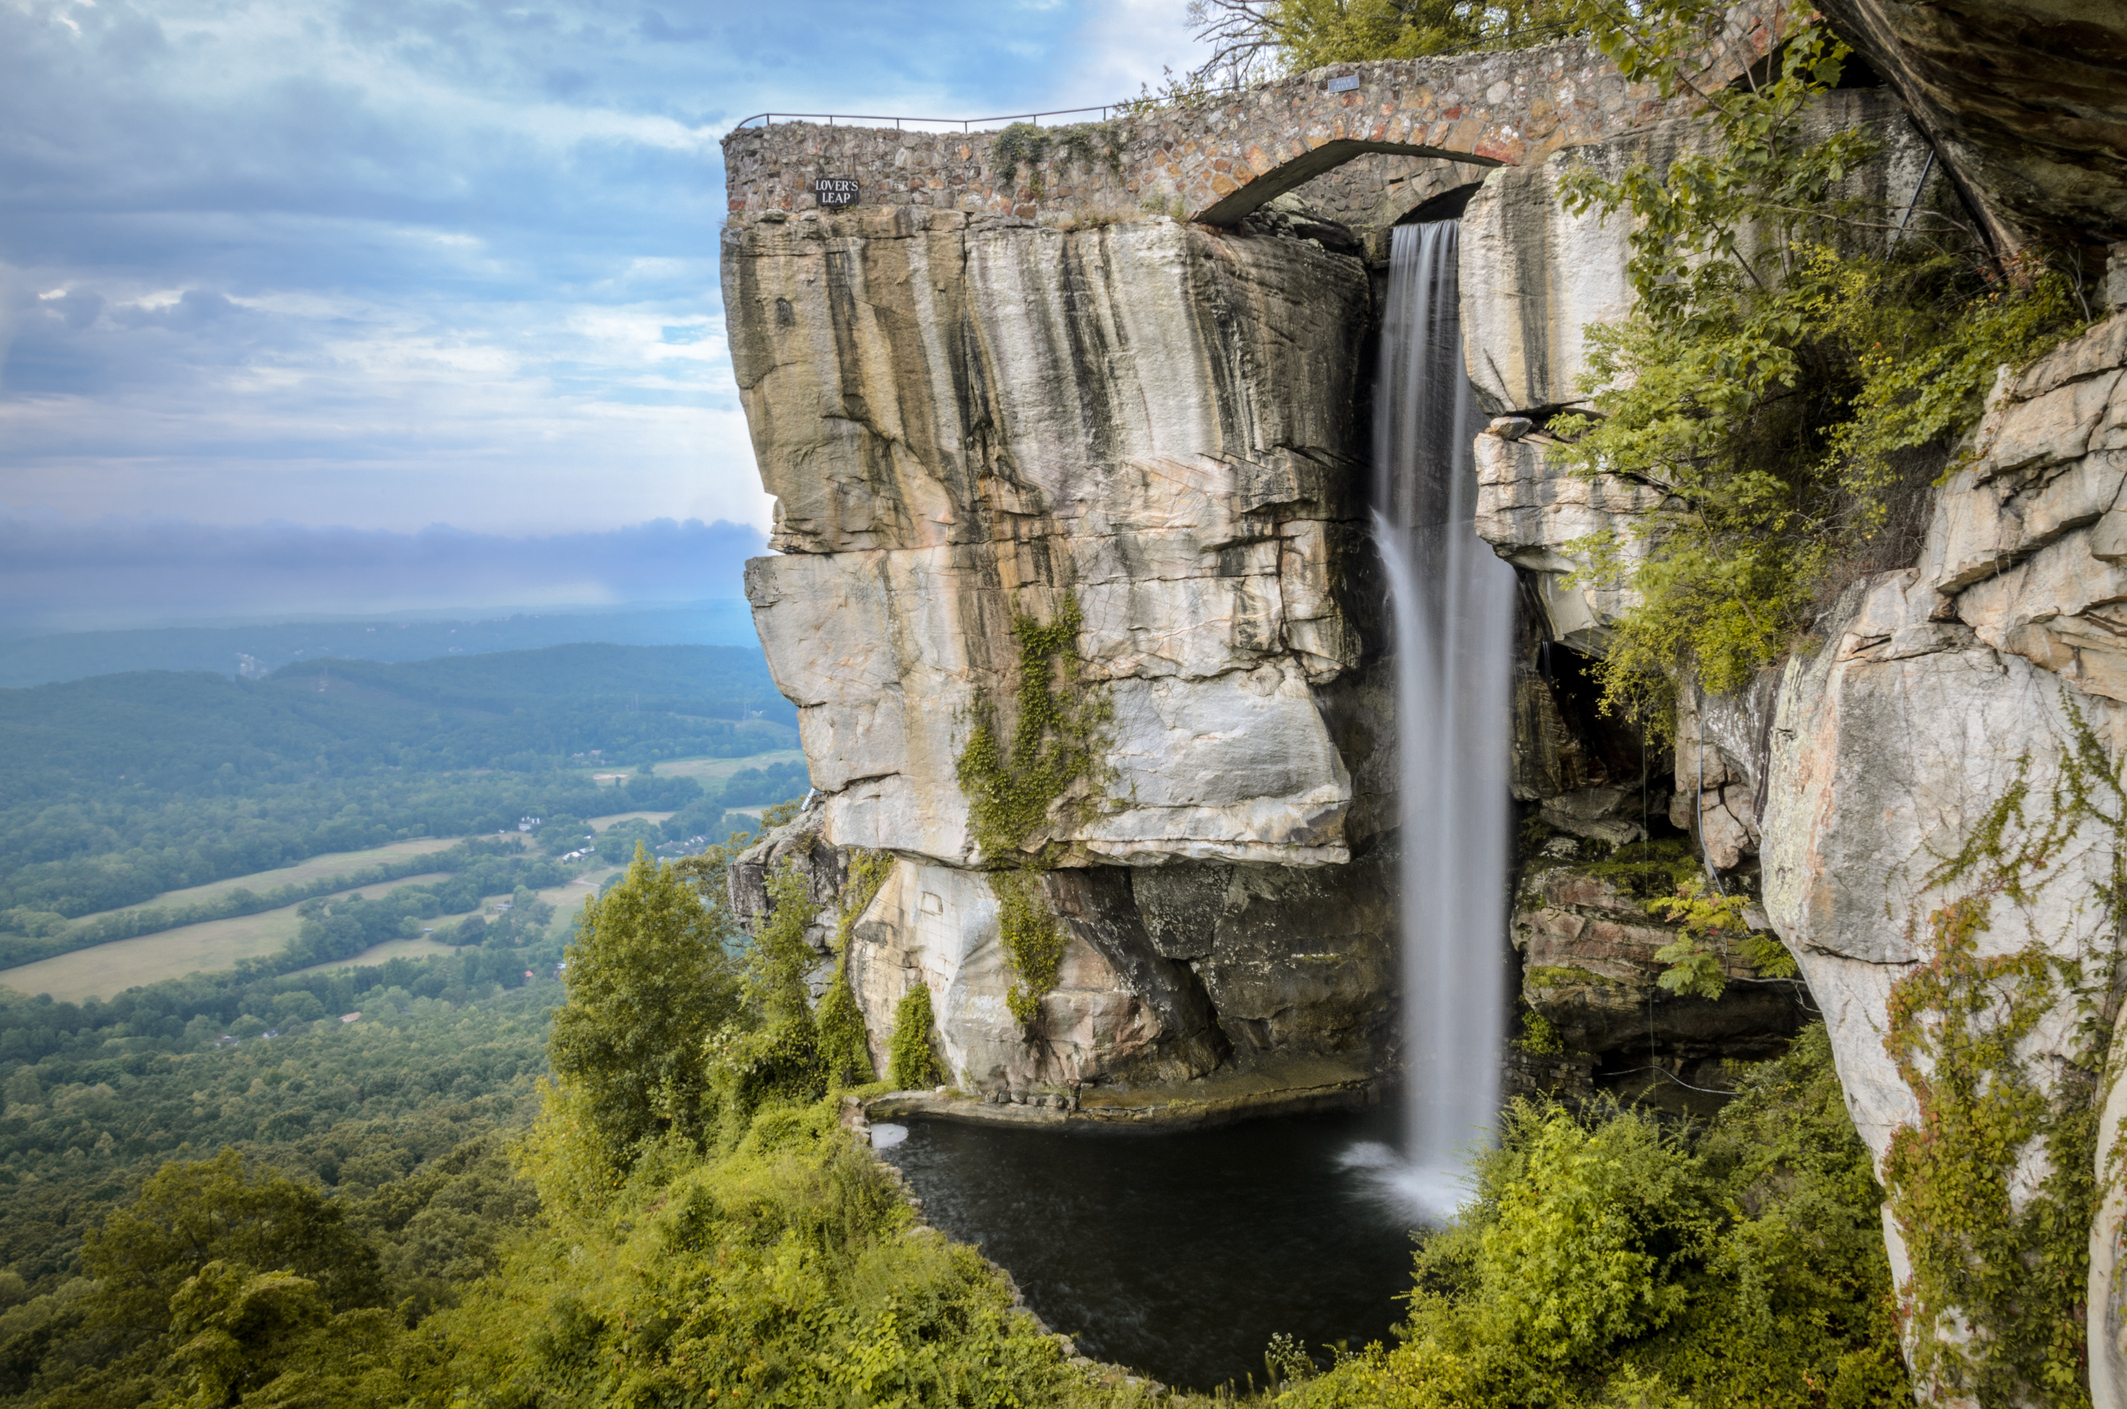 Long exposure waterfall picture of lookout mountain between Georgia and Tennessee